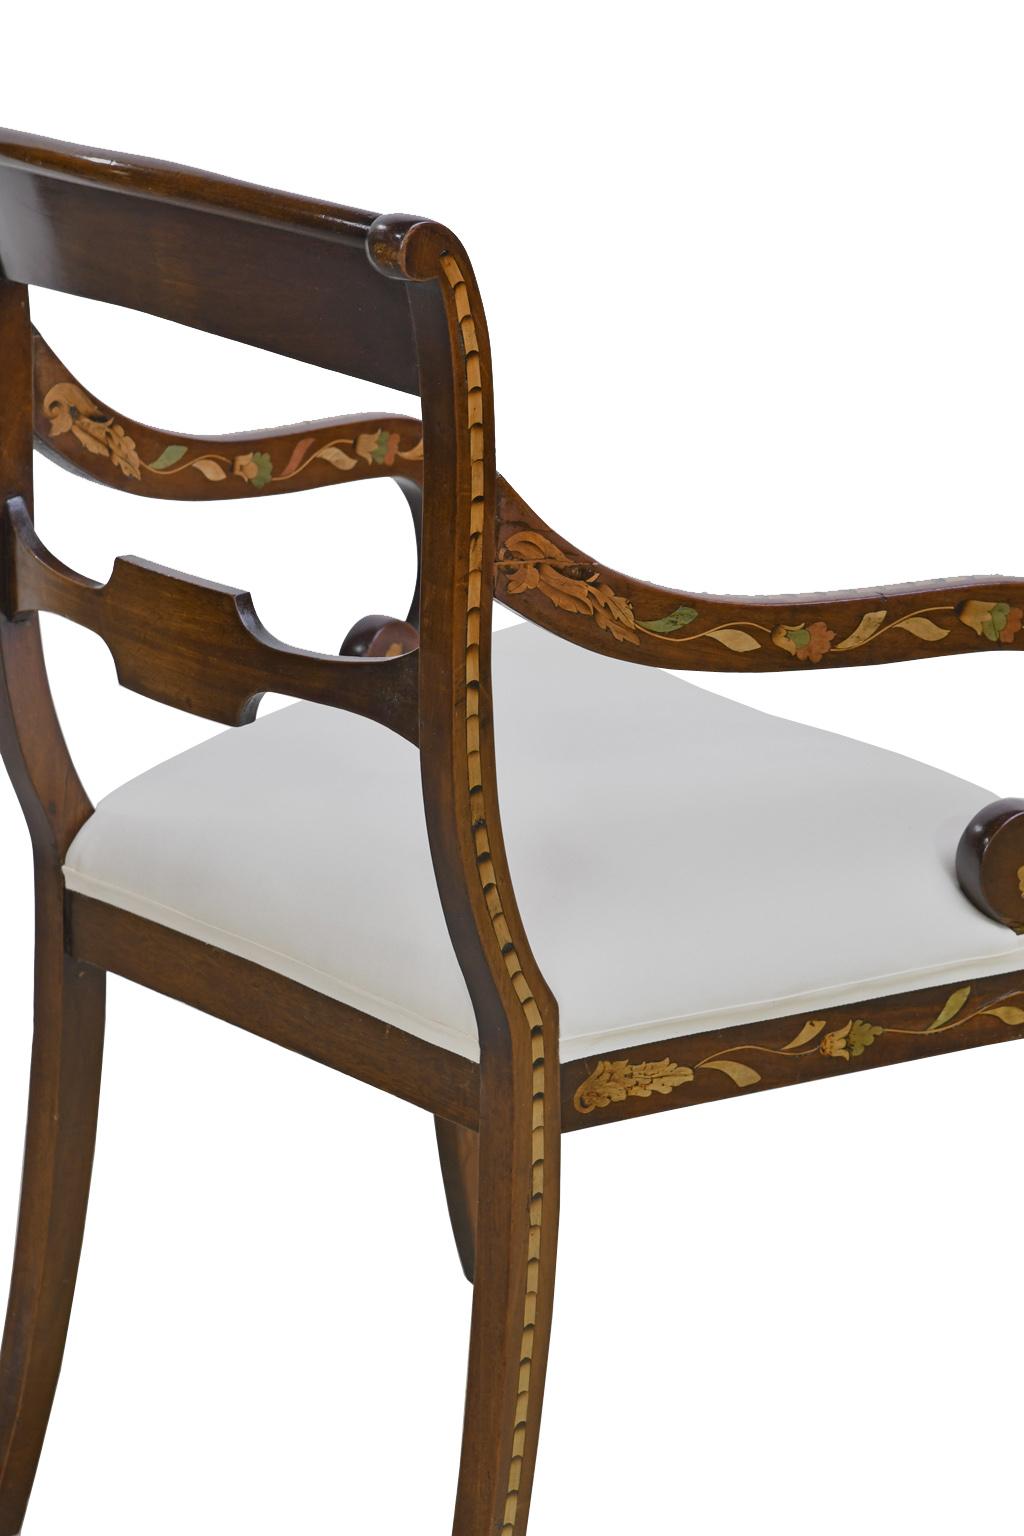 Upholstery English Regency Mahogany Armchair w/ Floral Marquetry & Upholstered Seat, c 1820